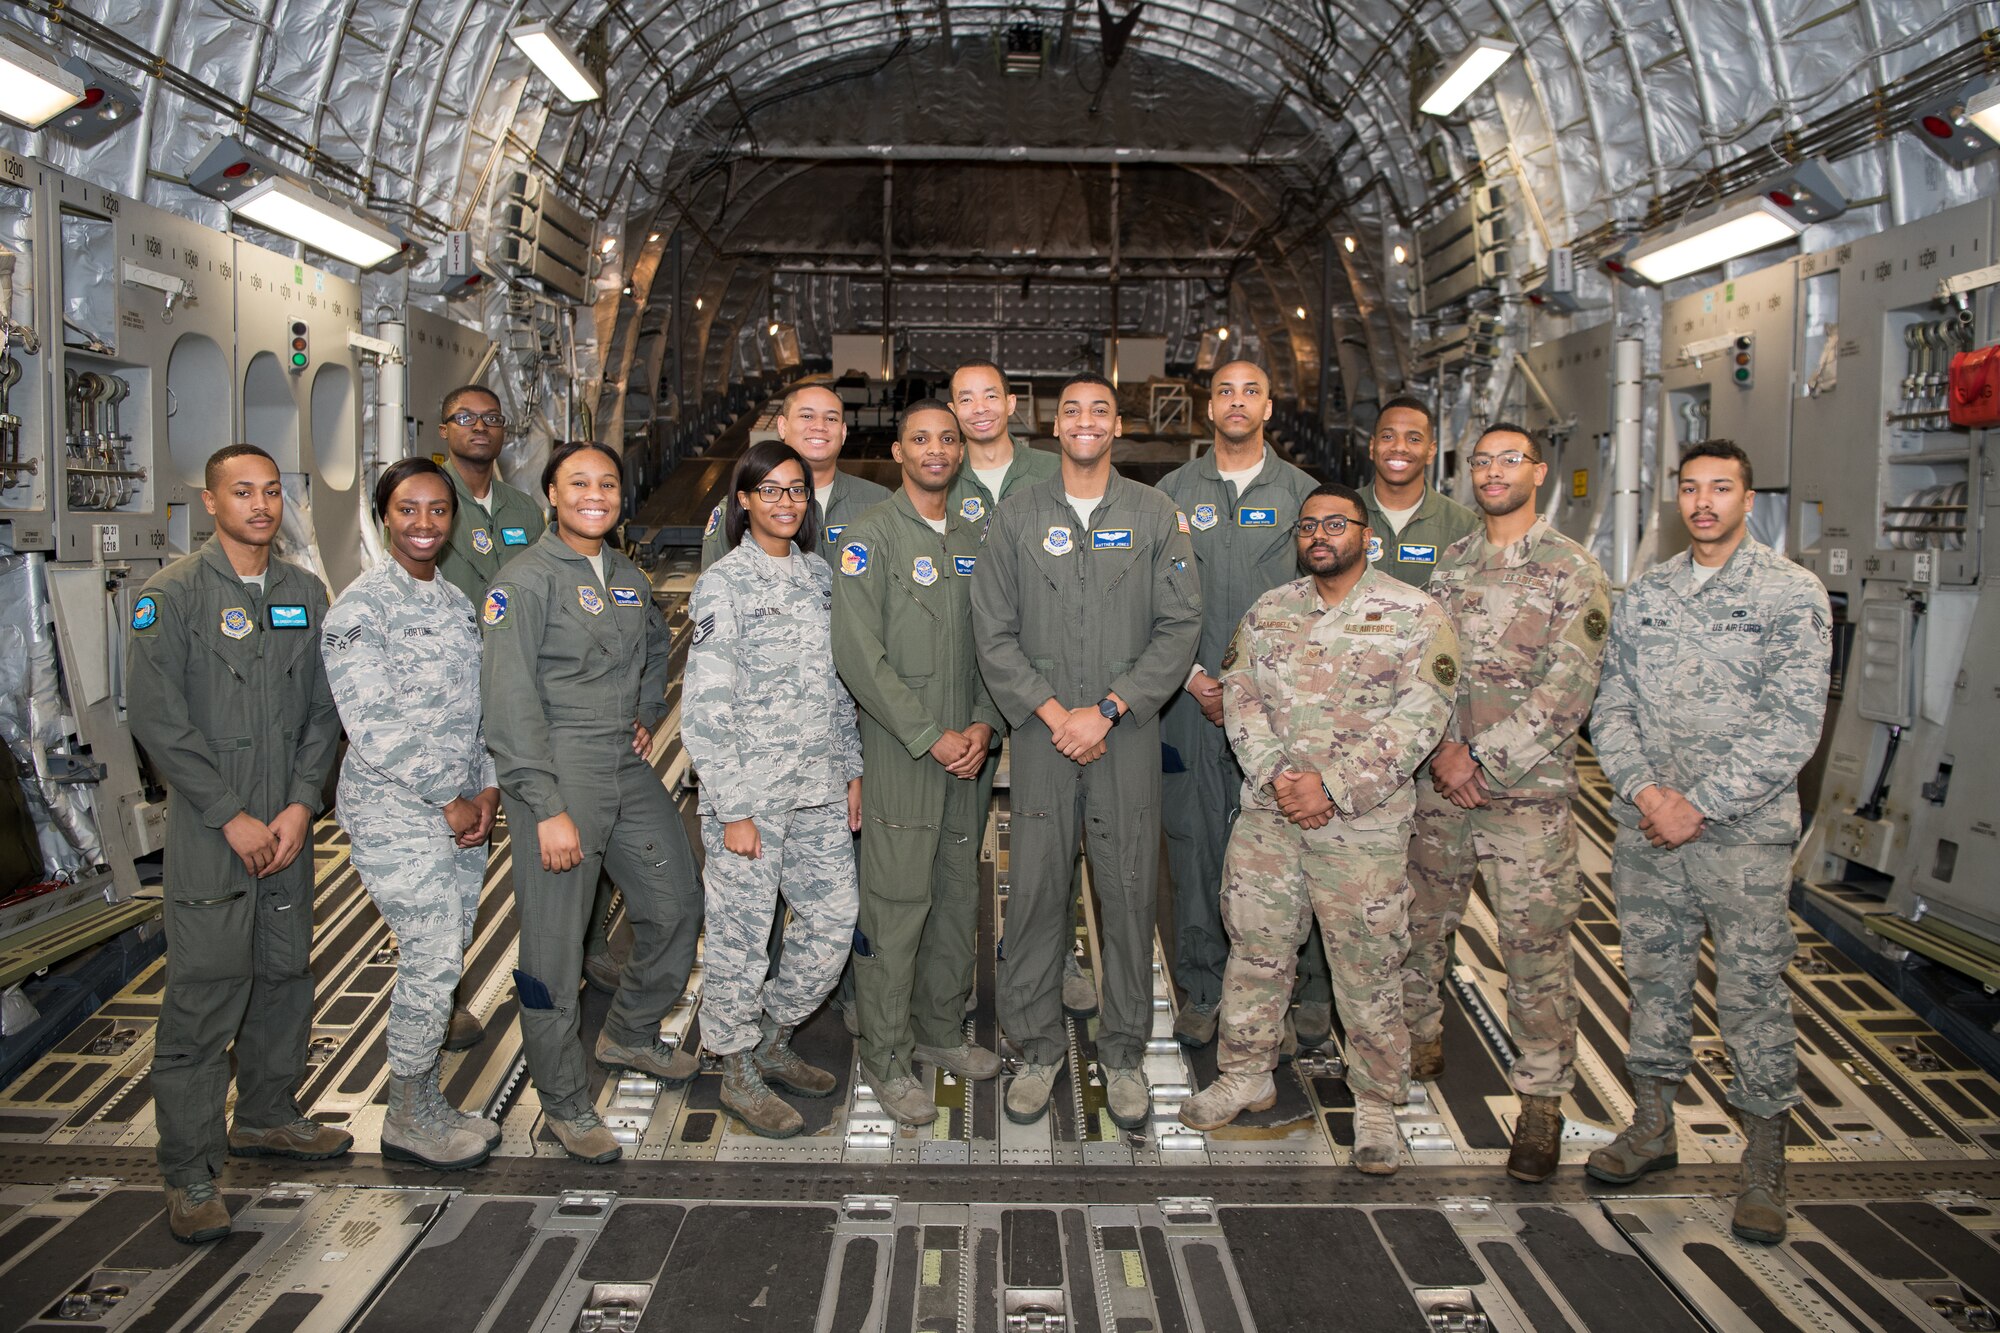 Airmen of the 3rd and 9th Airlift Squadrons who made up the flight crew for the African-American Heritage Flight Feb. 12, 2019, at Dover Air Force Base, Delaware. The flight was aimed at supporting the U.S. Air Force initiative to increase diversity and celebrate African-American History Month. (U.S. Air Force photo by Mauricio Campino)